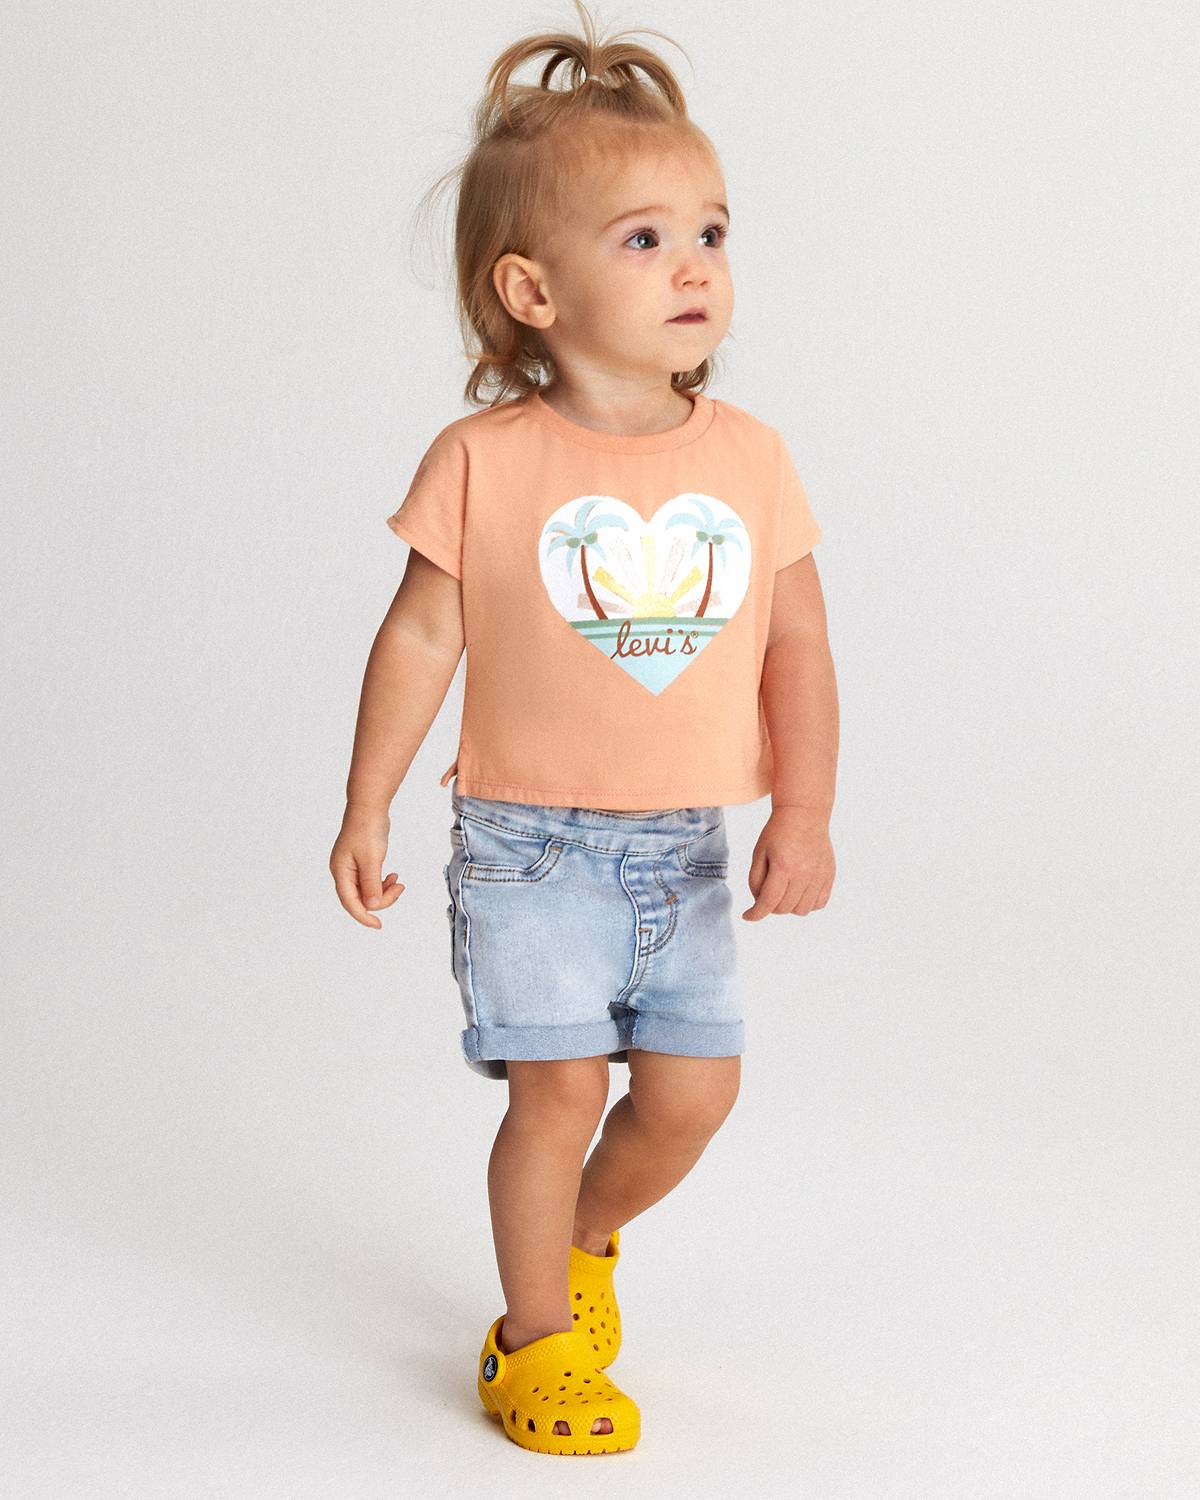 Clothes for Girls - Shop Cute Shirts, Jeans, Shorts & More